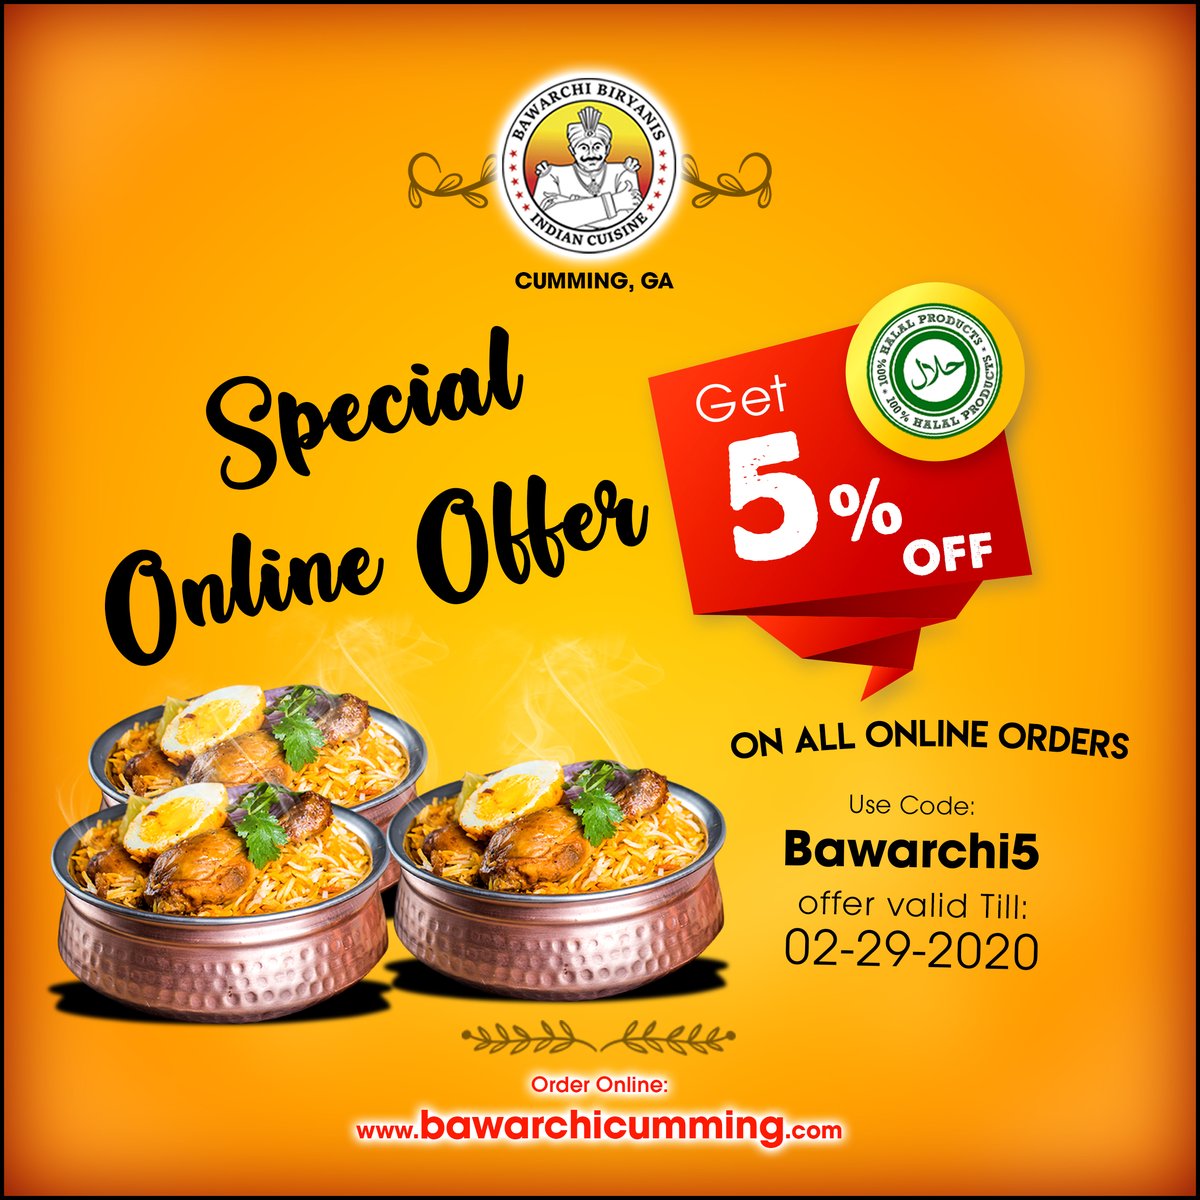 Beat the hunger with Bawarchi Biryanis - Cumming, GA👊😎

Now Get 5% Off on all online orders

Use Code - BAWARCHI5

Offer Valid up to - 01-31-2020

Order Online📲: bawarchicumming.com

#BawarchiCumming #BawarchiBiryanis #OrderOnline  #orderonlie #specialoffer #indiancuisine